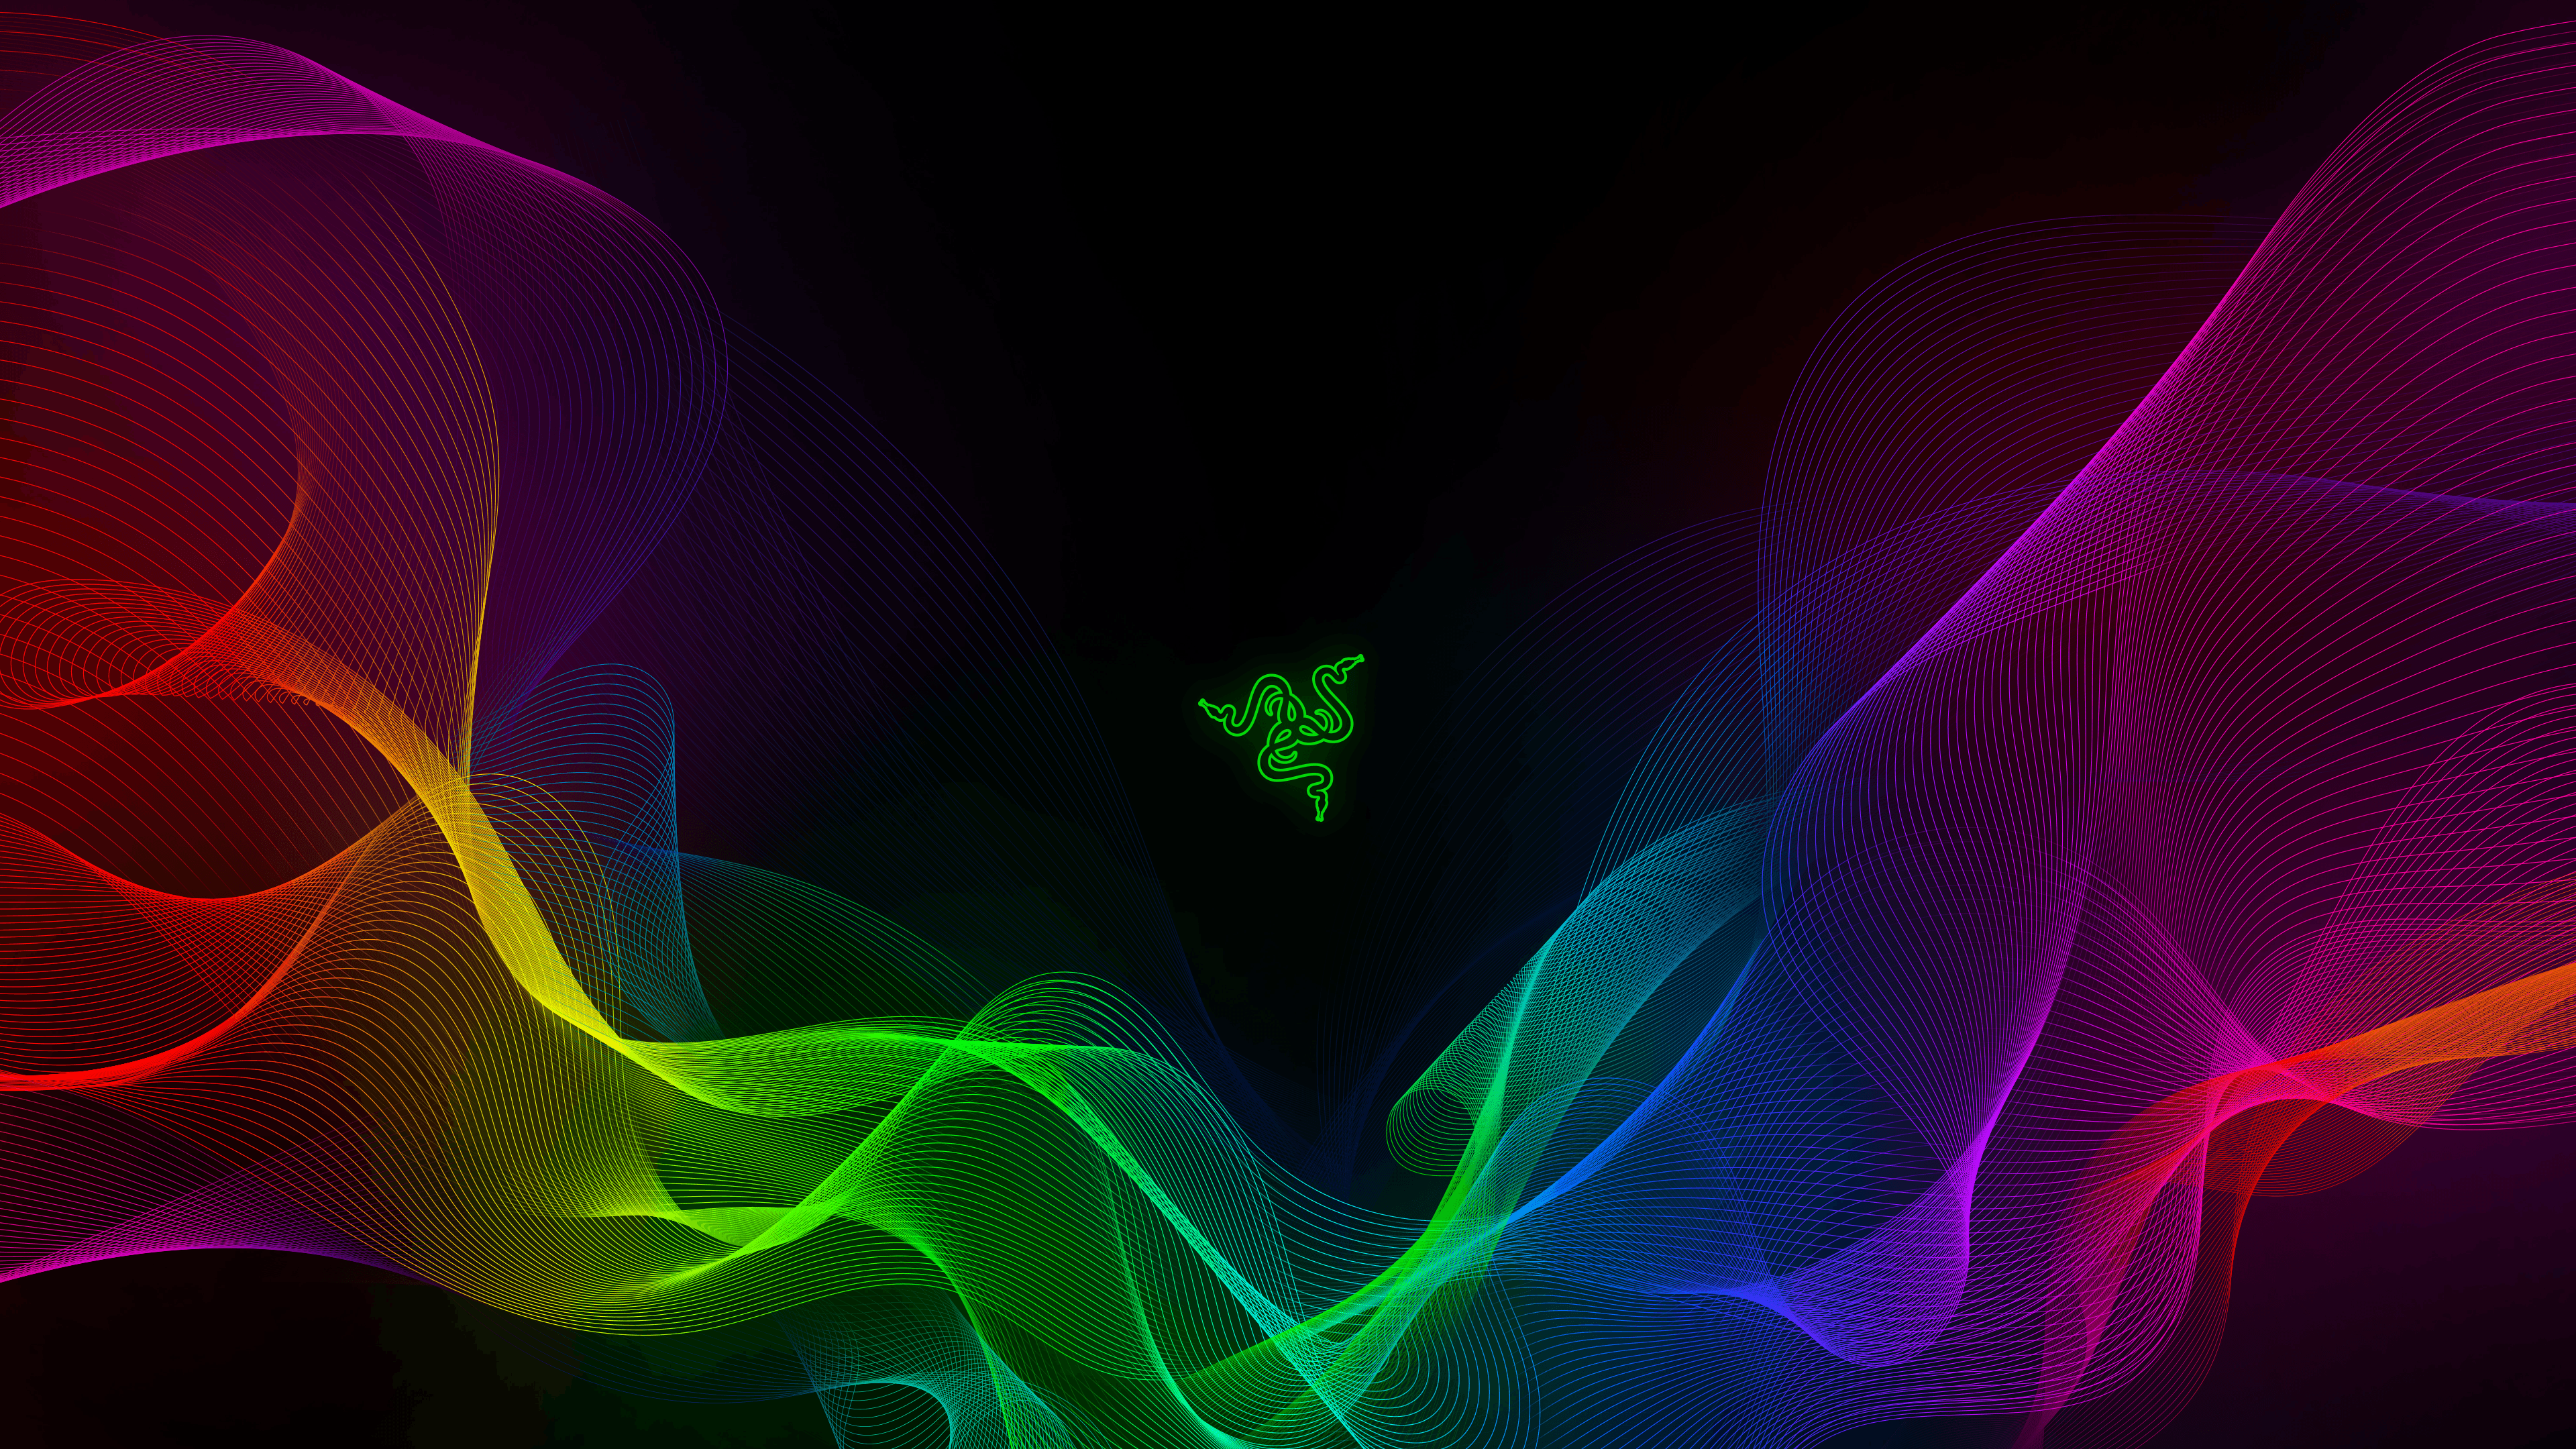 Can some one make this wallpaper dual screen and if possible take away logo: razer